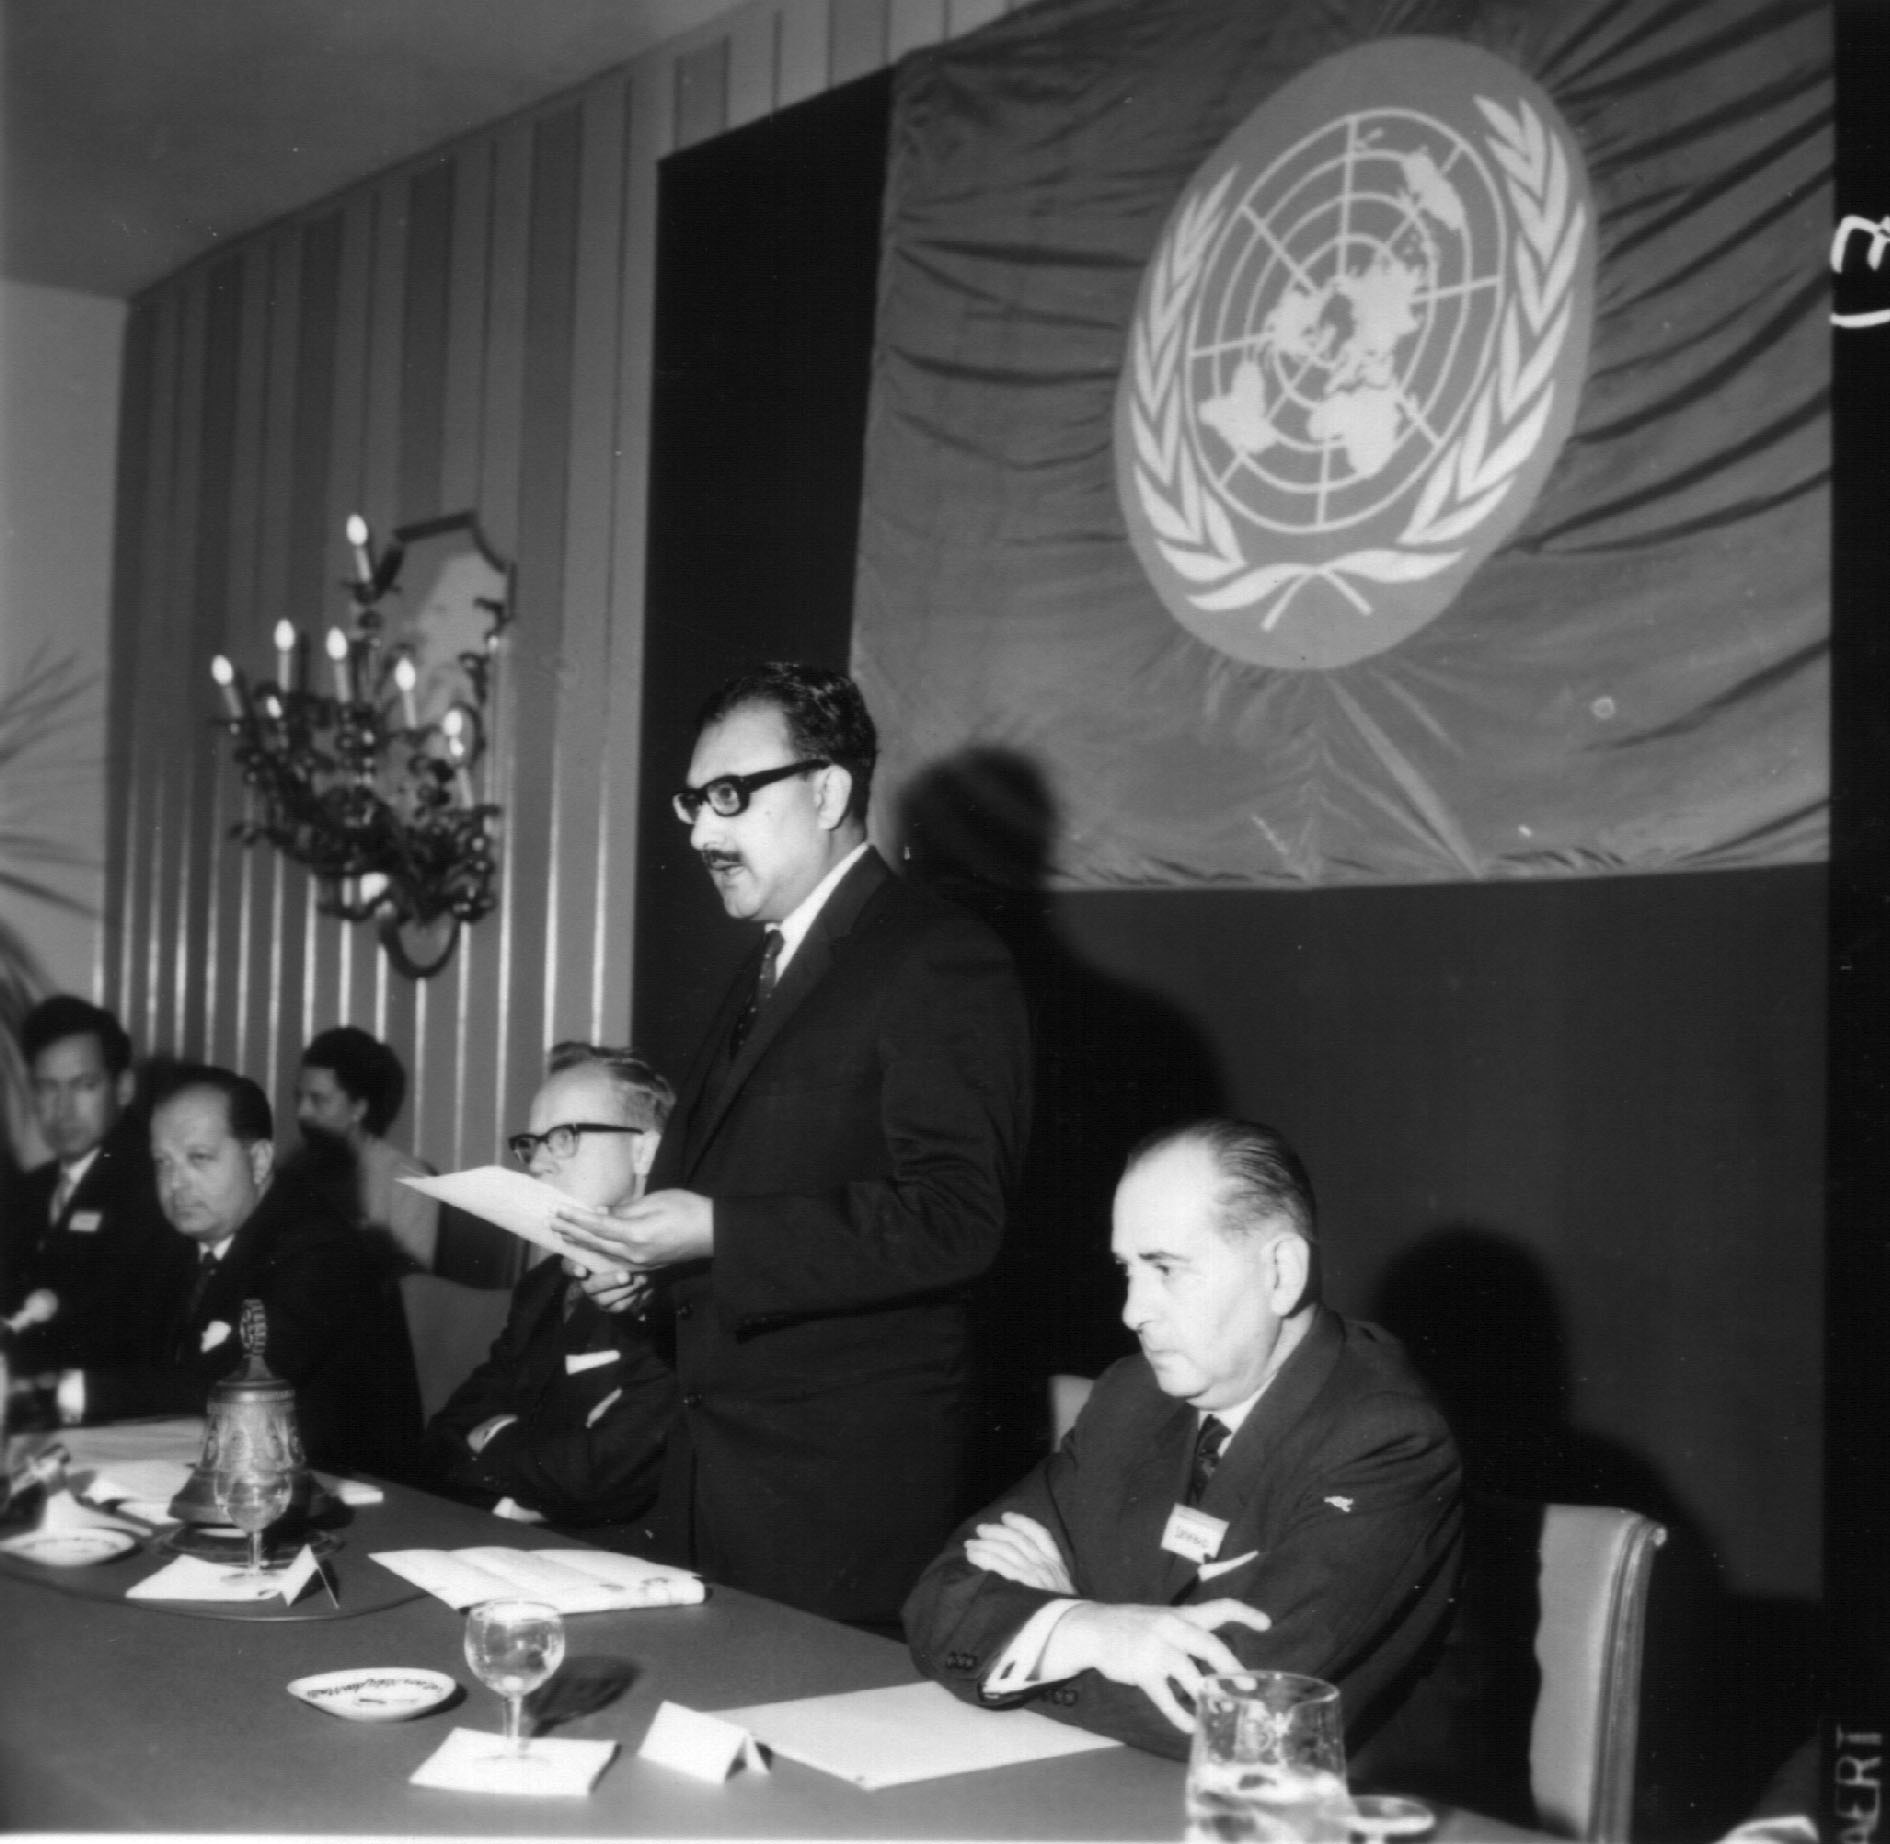 ICTP founder and Nobel Prize laureate Abdus Salam at the first international workshop on plasma physics and controlled fusion in 1964